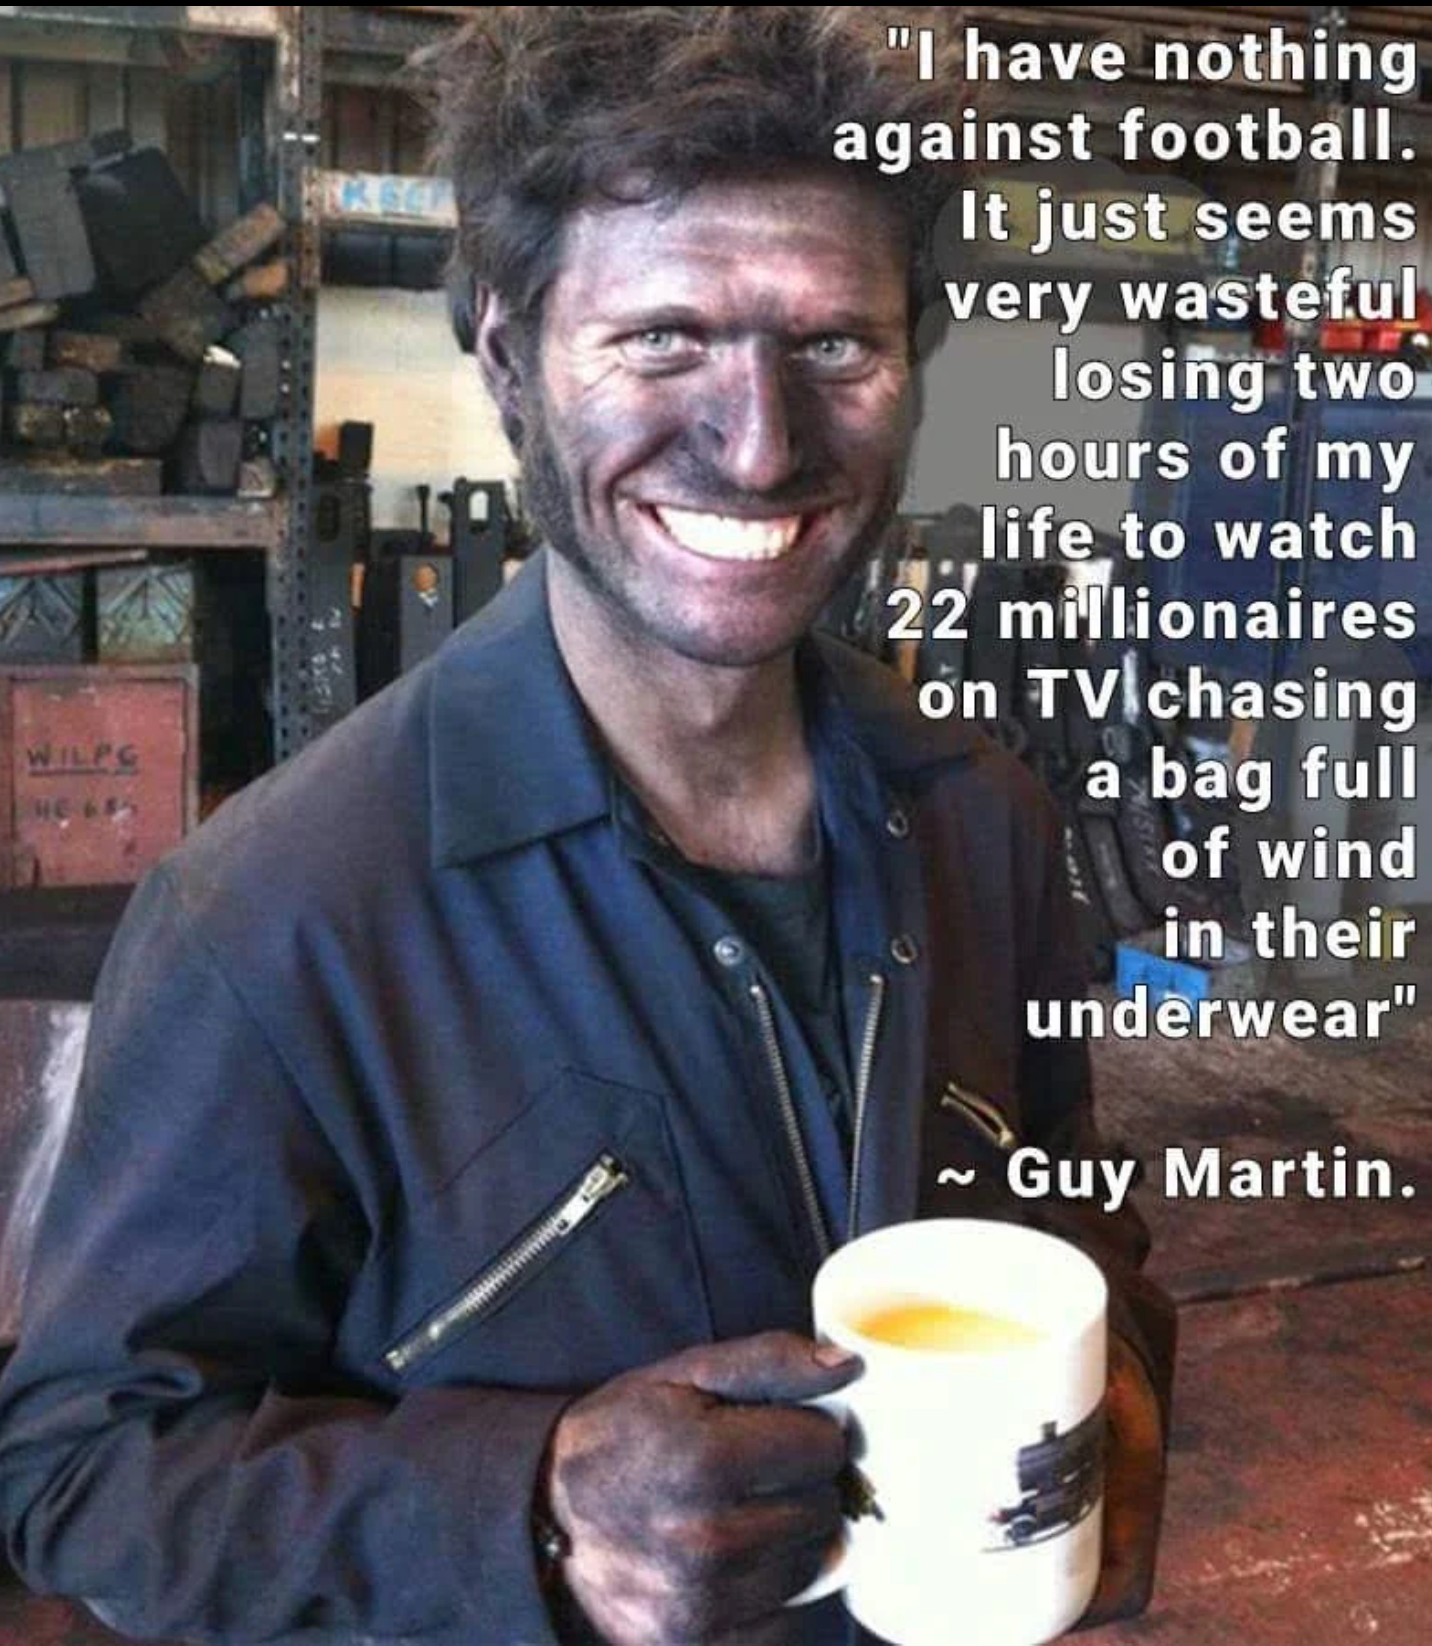 guy martin football - "I have nothing against football. It just seems very wasteful losing two hours of my life to watch 22 millionaires on Tv chasing a bag full of wind in their underwear" ~ Guy Martin.